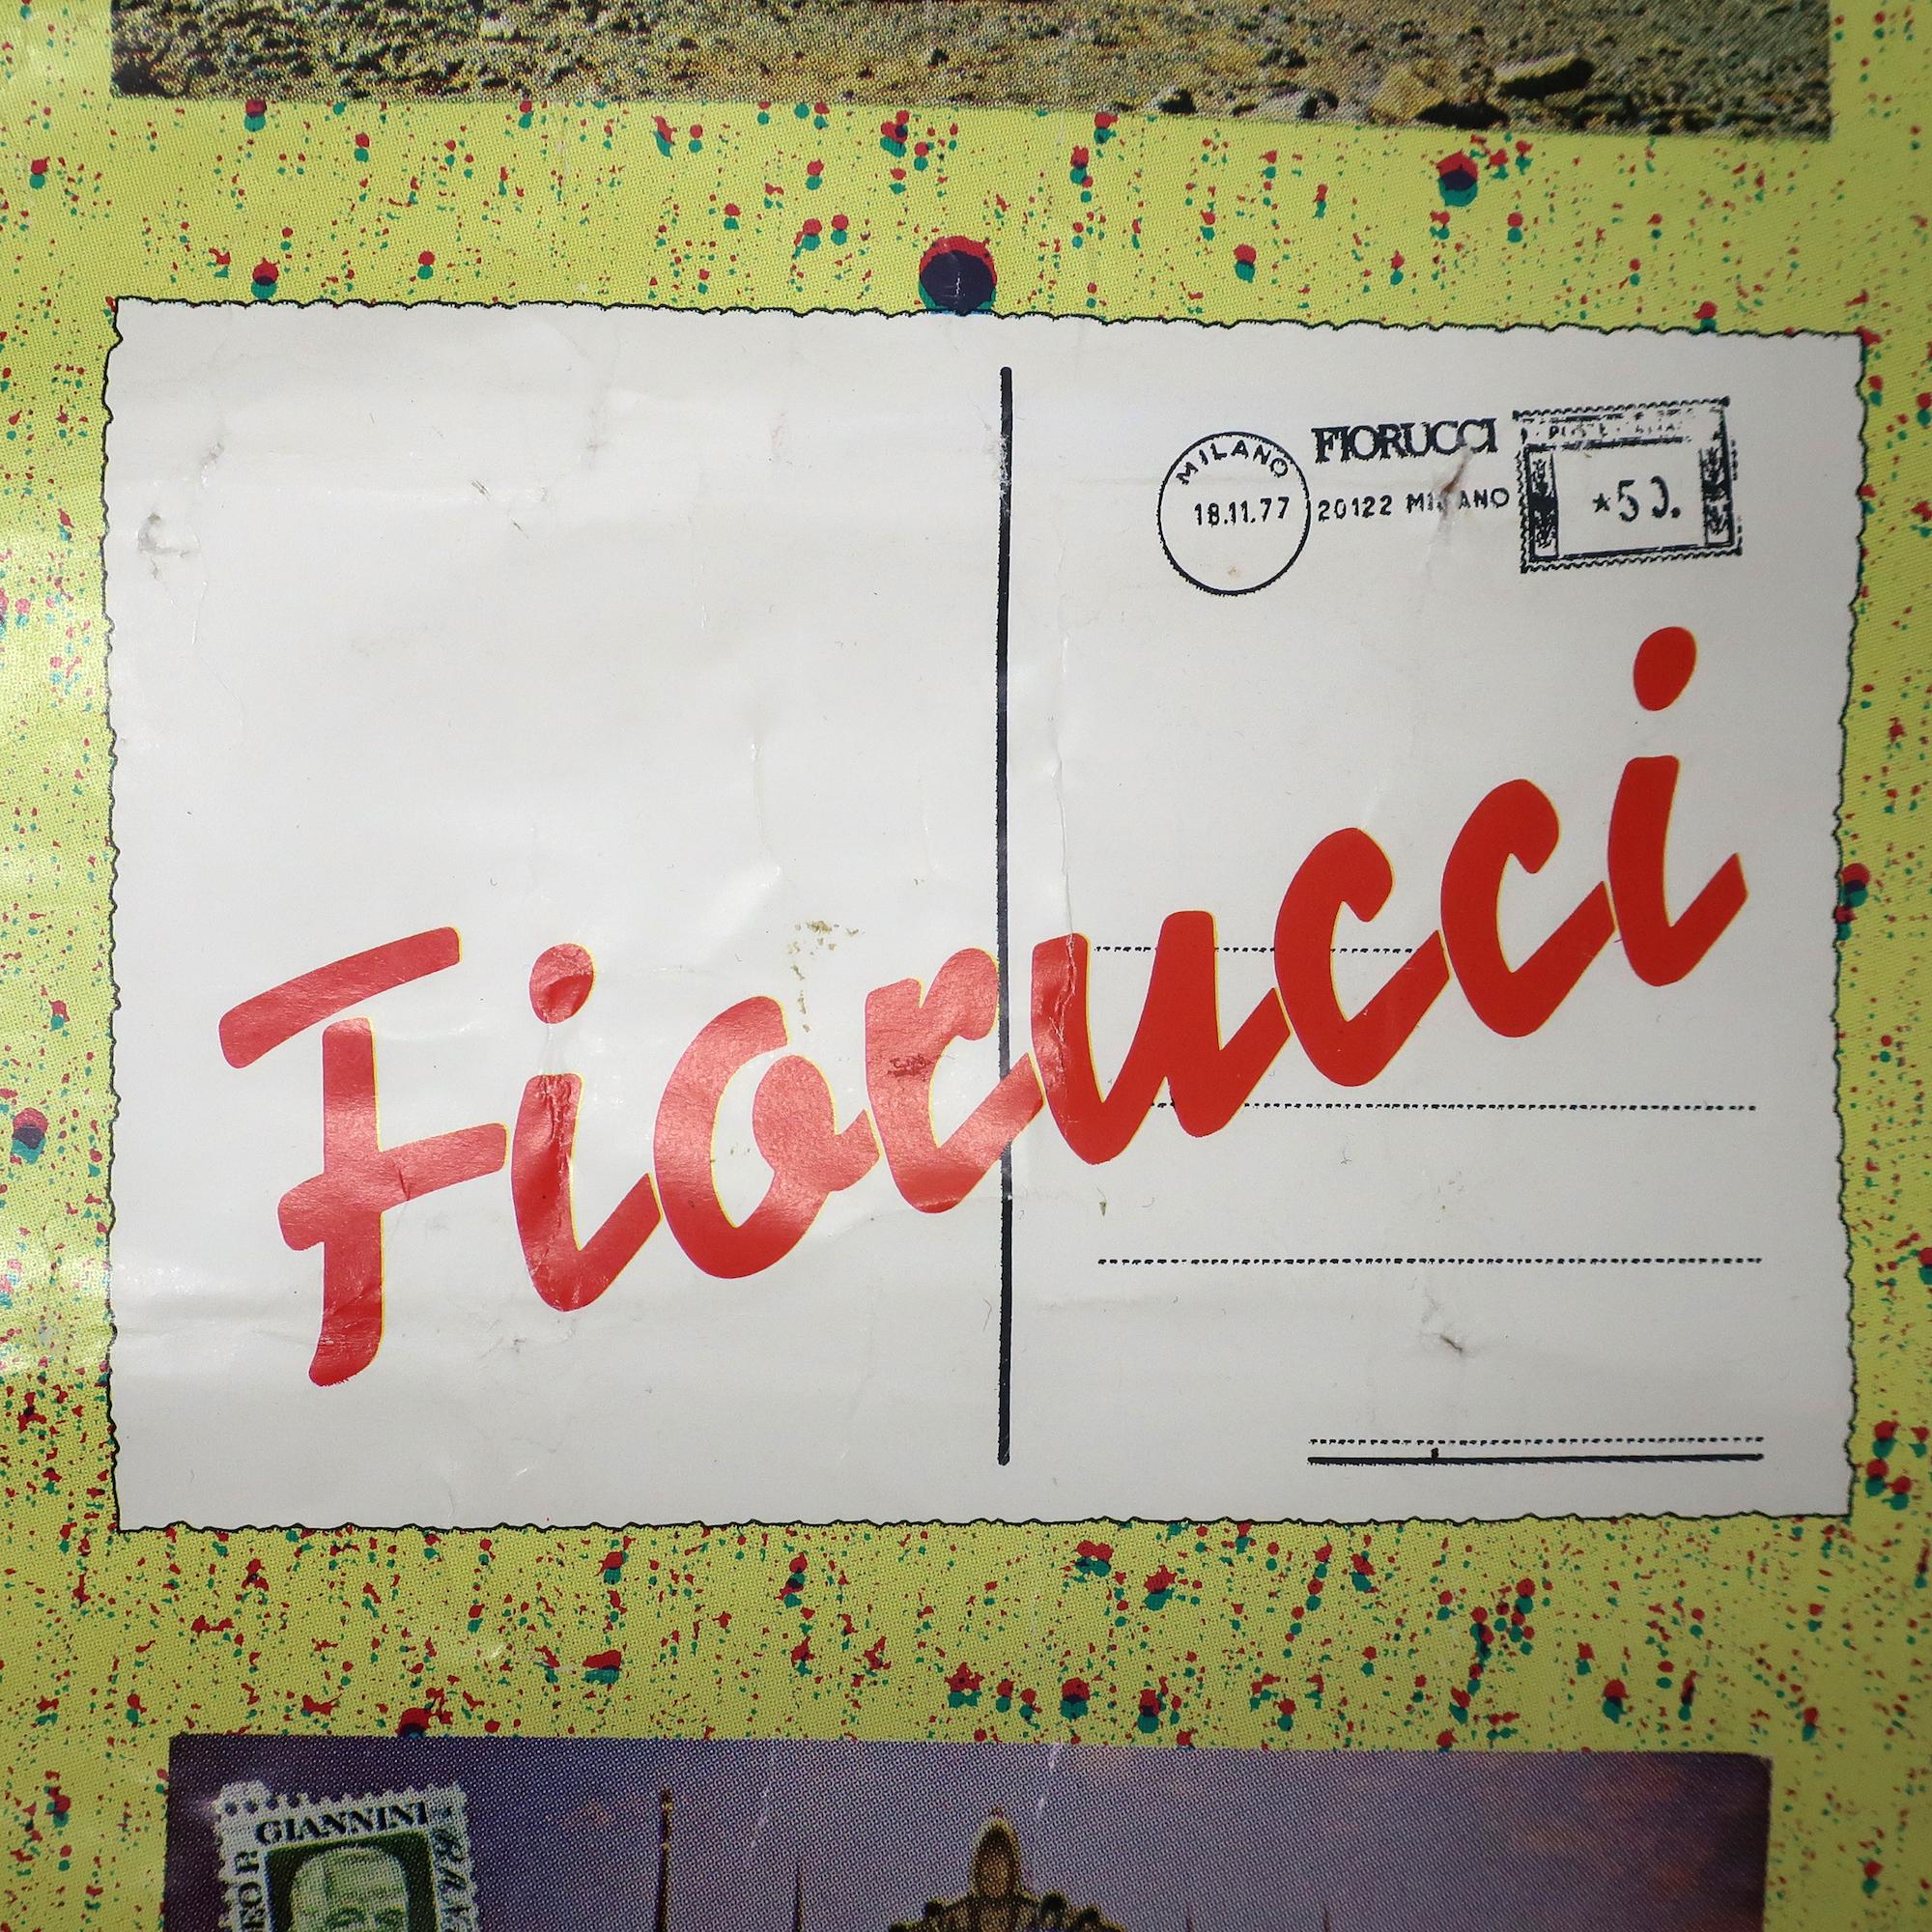 A vintage and rare Fiorucci poster featuring postcards from around the world in a collage that captures both sights from around the world and beautiful woman in various states of undress — plus Queen Elizabeth holding a tin of crackers

Elio